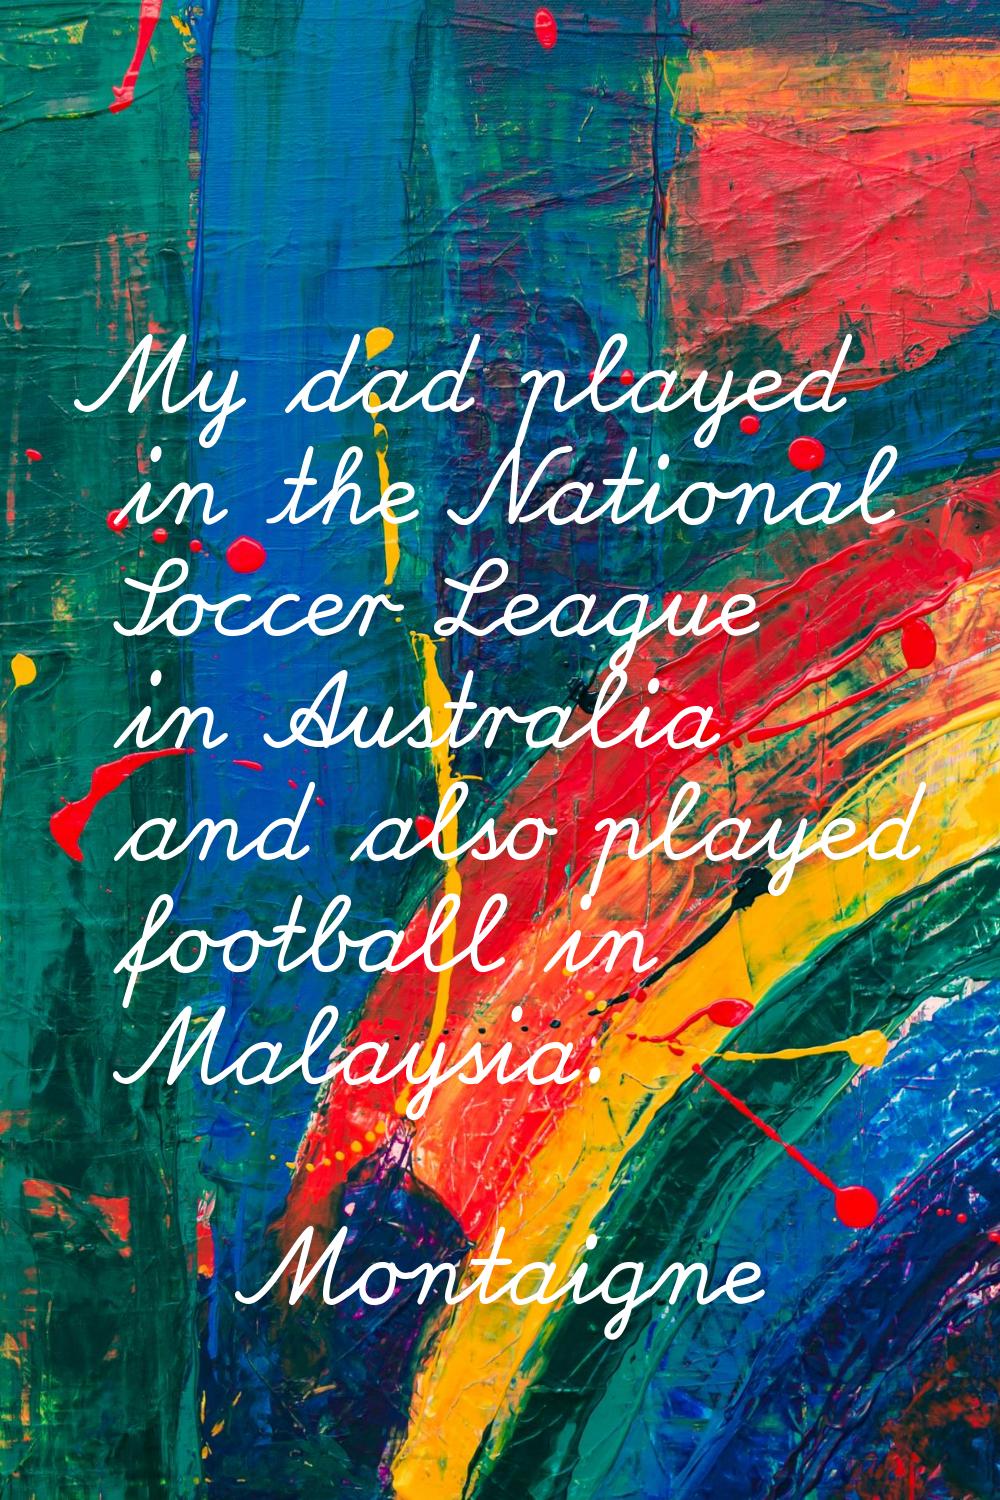 My dad played in the National Soccer League in Australia and also played football in Malaysia.